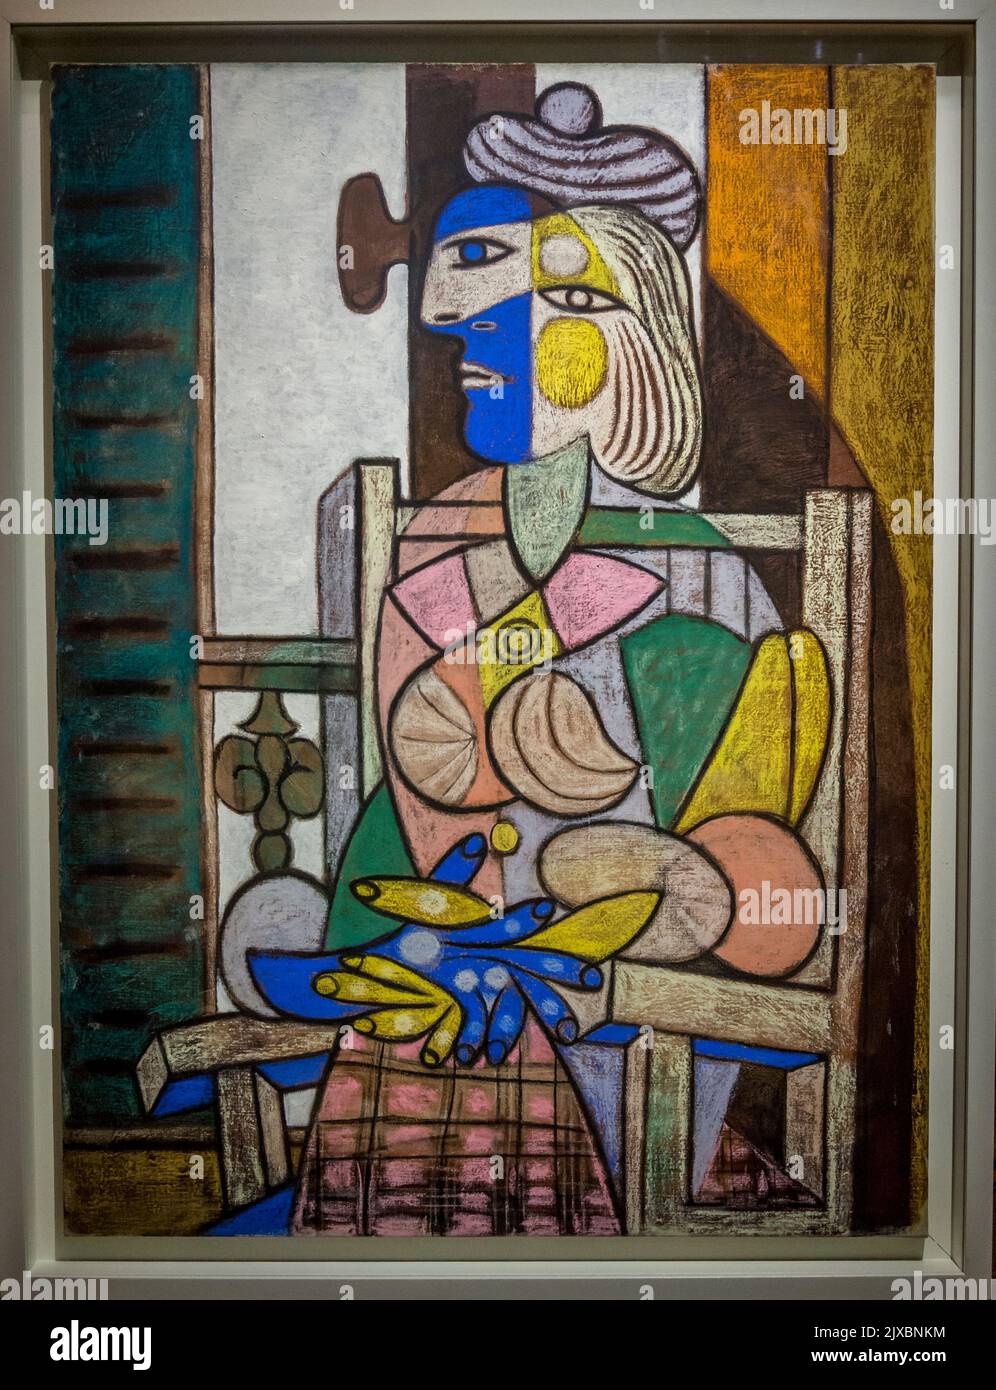 'Woman sitting on an armchair' painting, Picasso Museum, an art gallery located in the Hôtel Salé in rue de Thorigny, in the Marais district dedicated Stock Photo